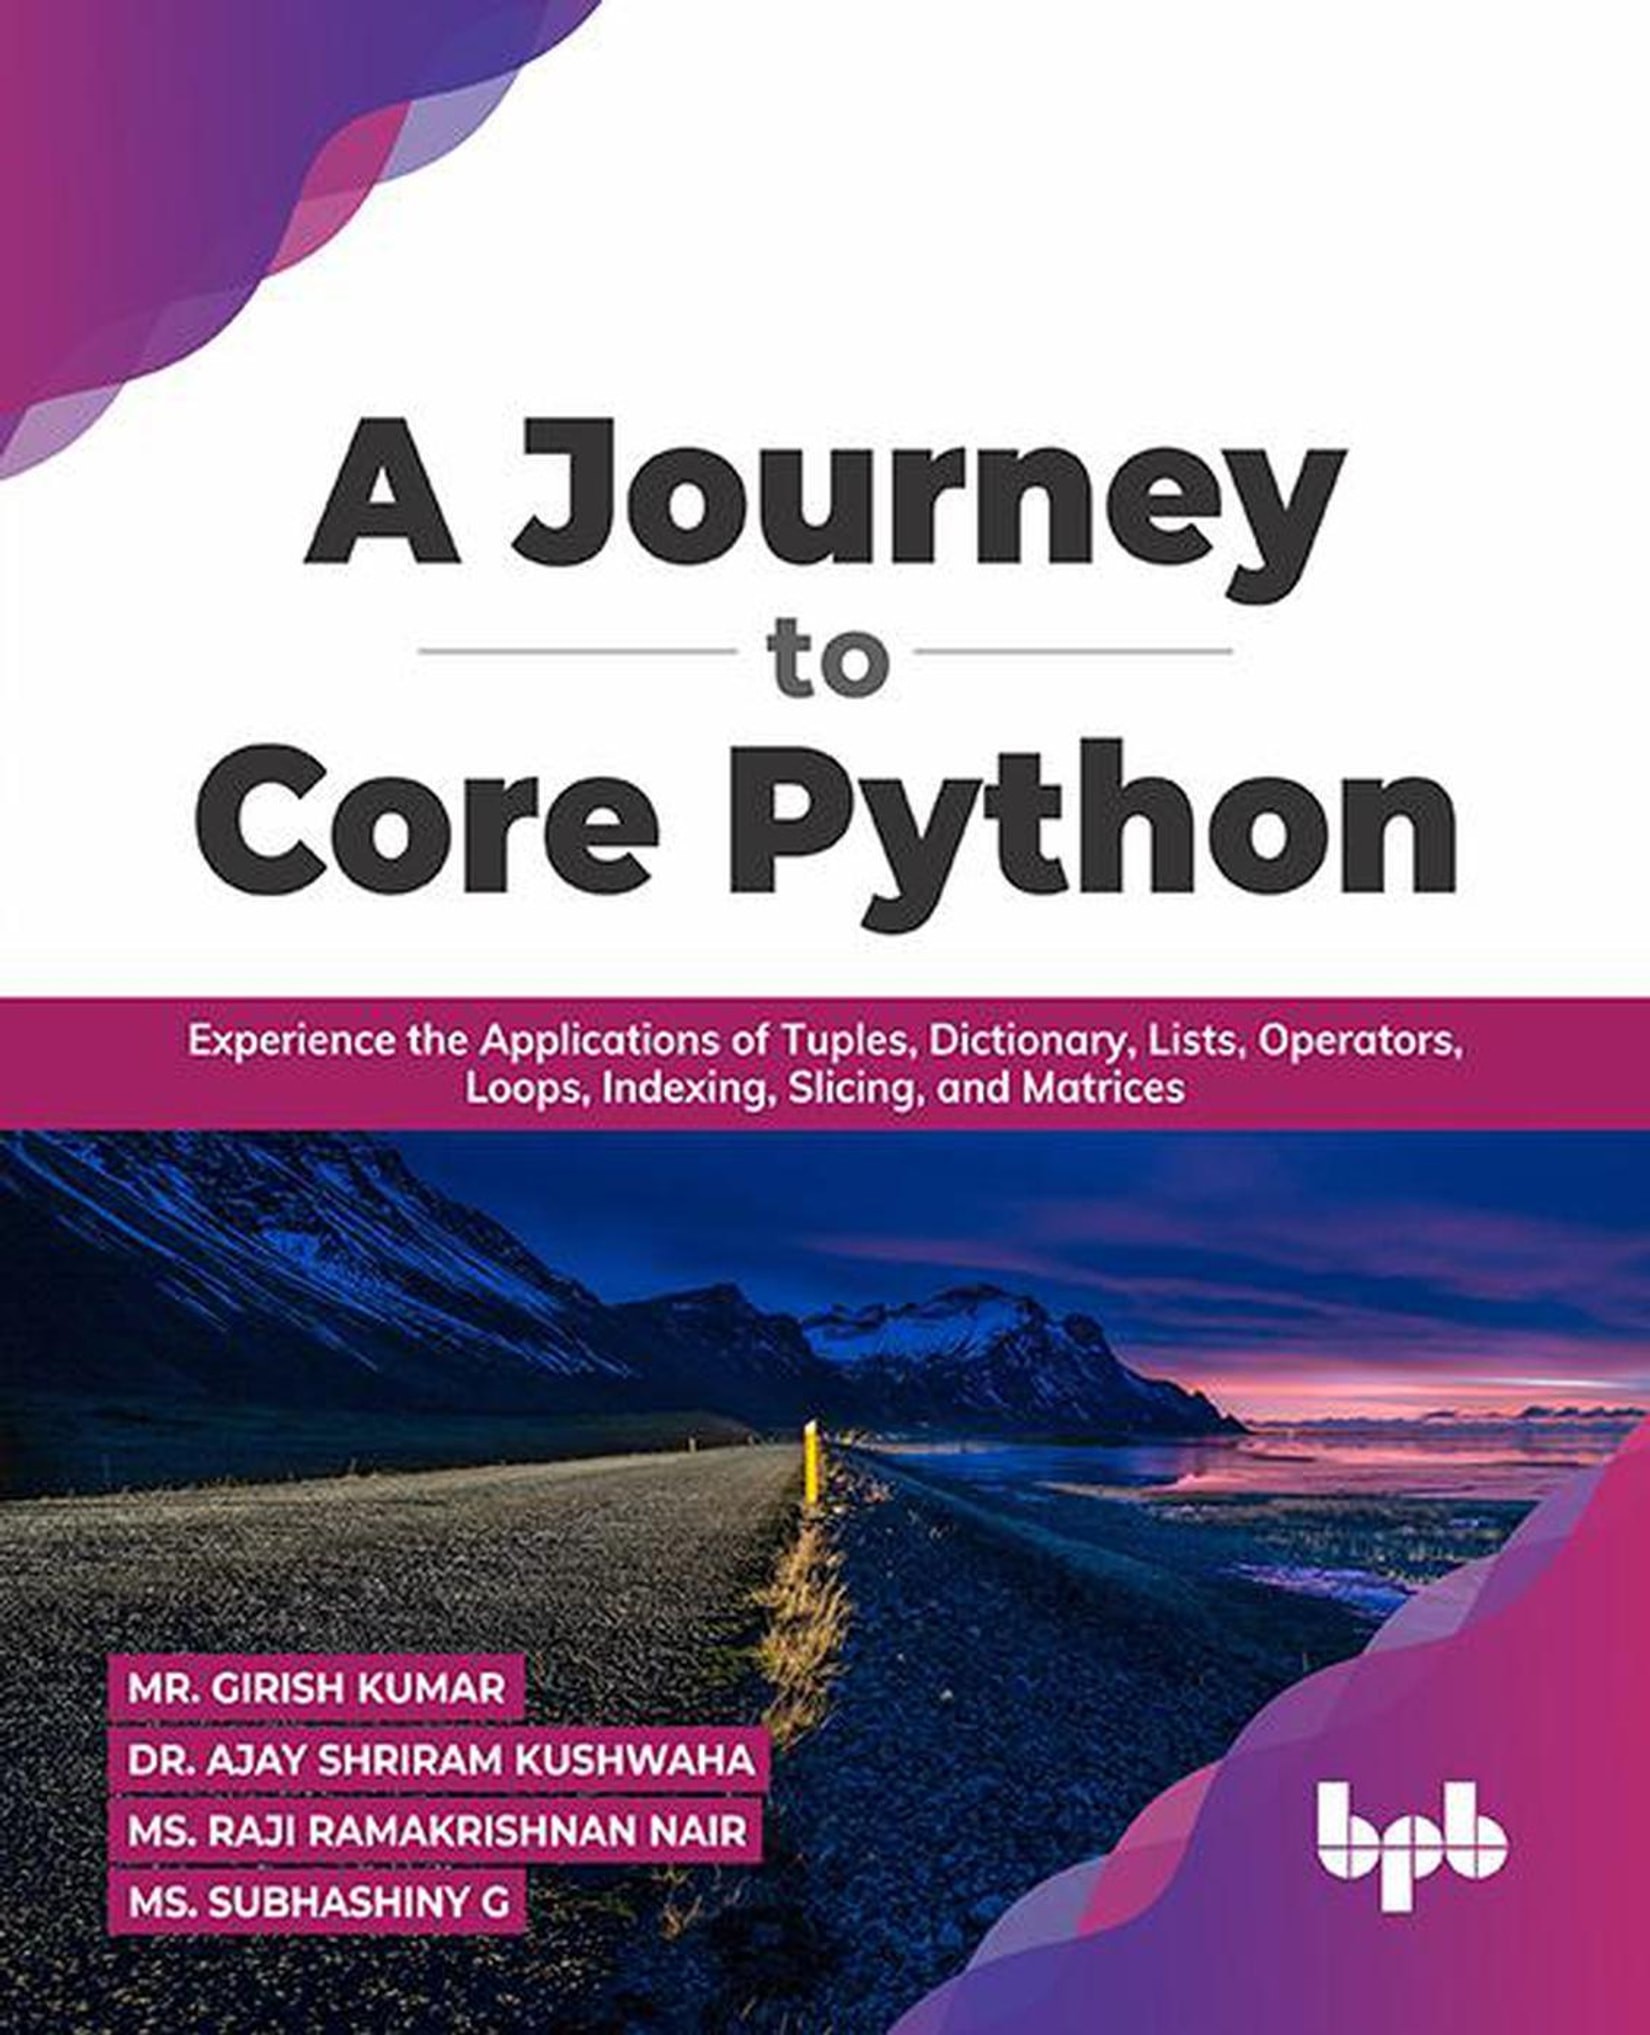 A Journey to Core Python: Experience the Applications of Tuples, Dictionary, Lists, Operators, Loops, Indexing, Slicing, and Matrices